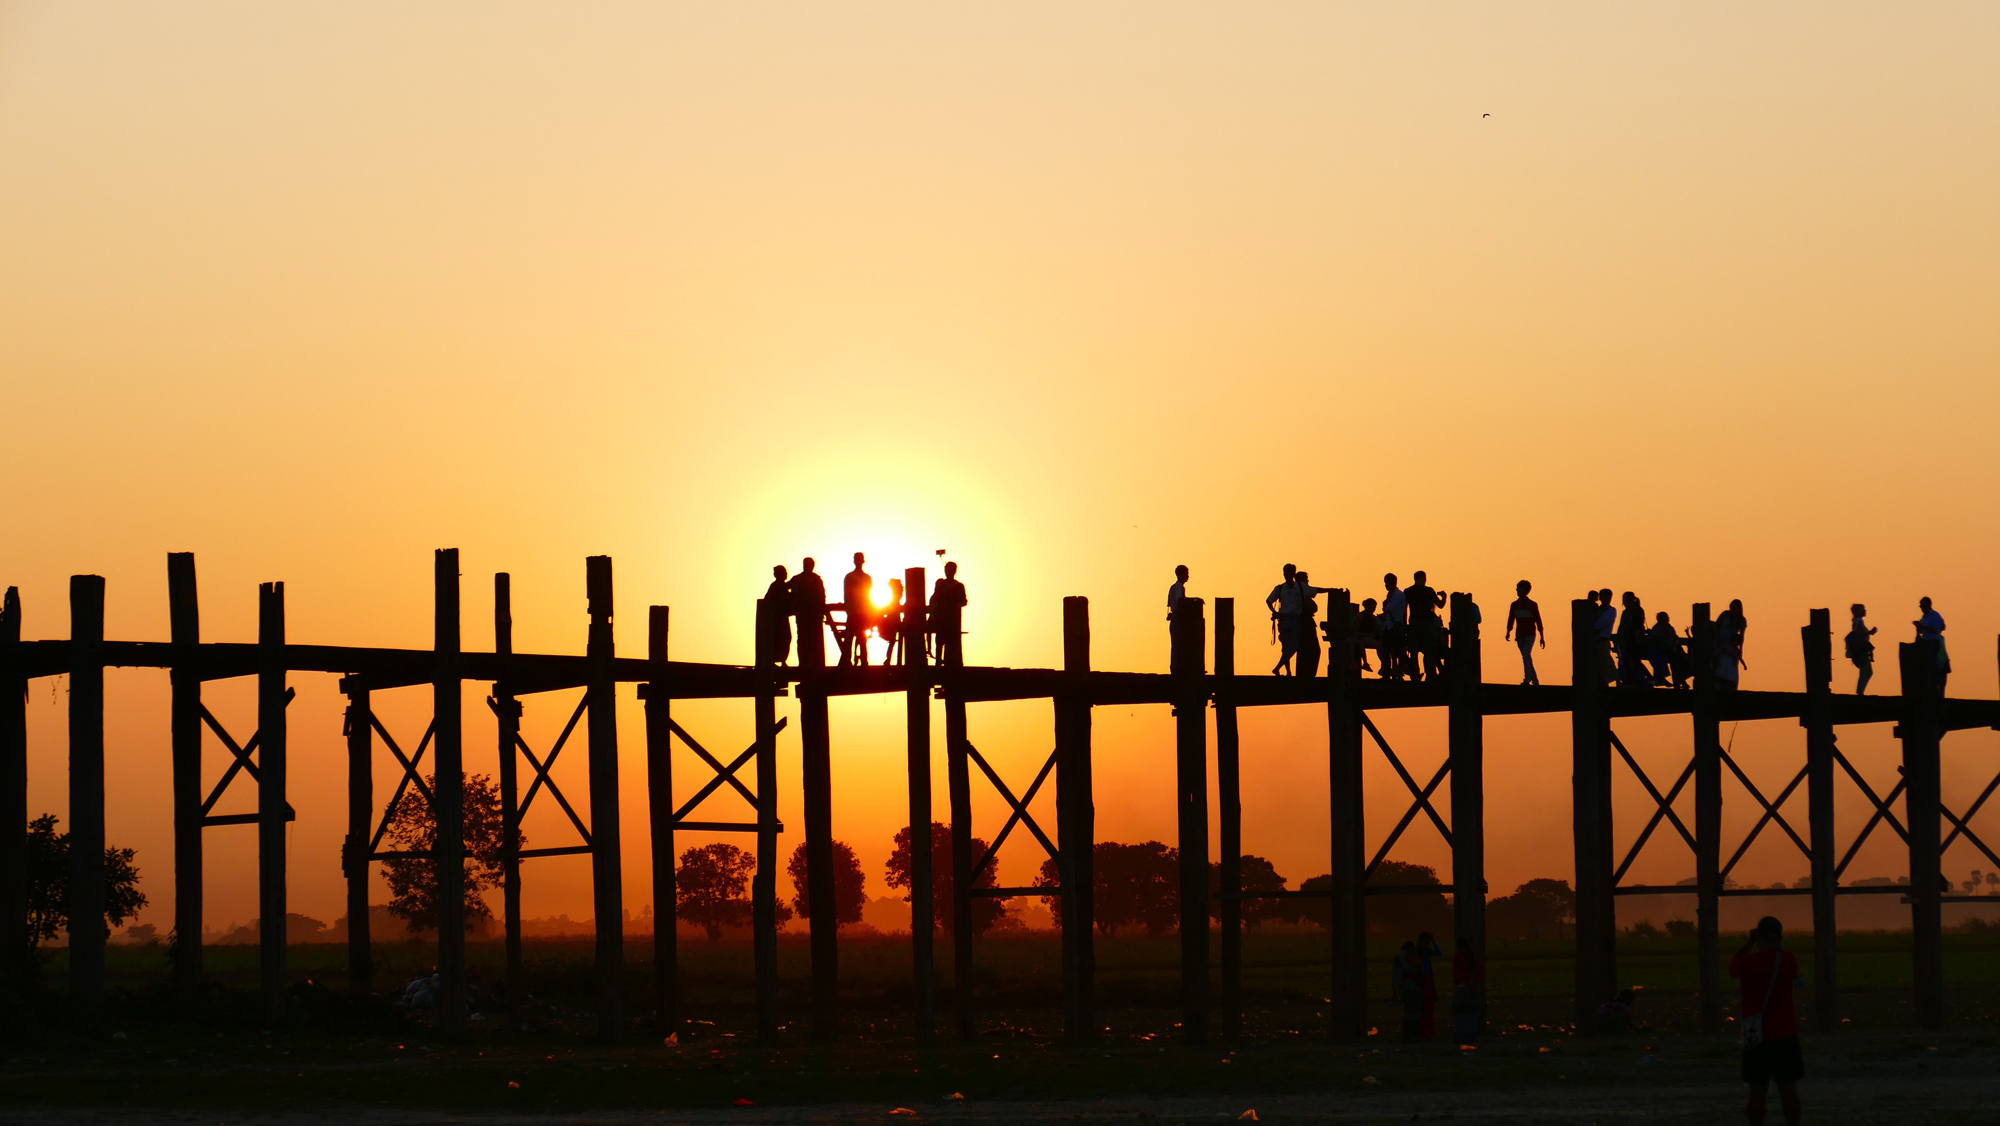 Group of people on a bridge at sunset